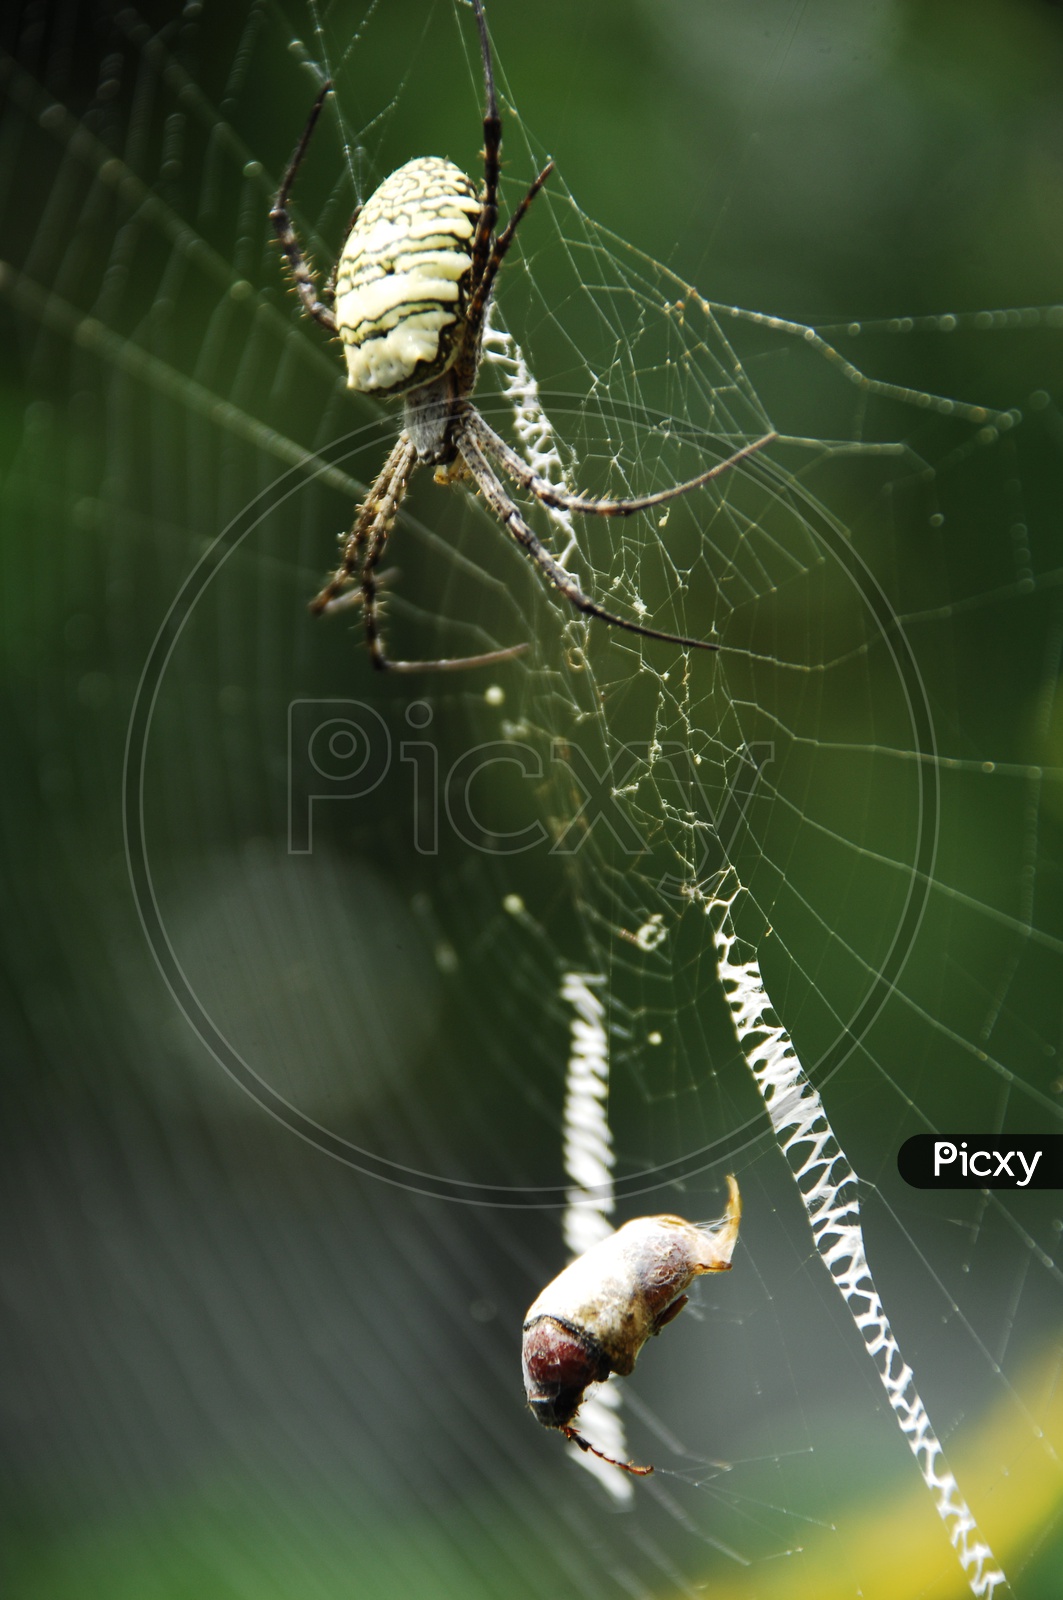 A Spider catching its prey in a web